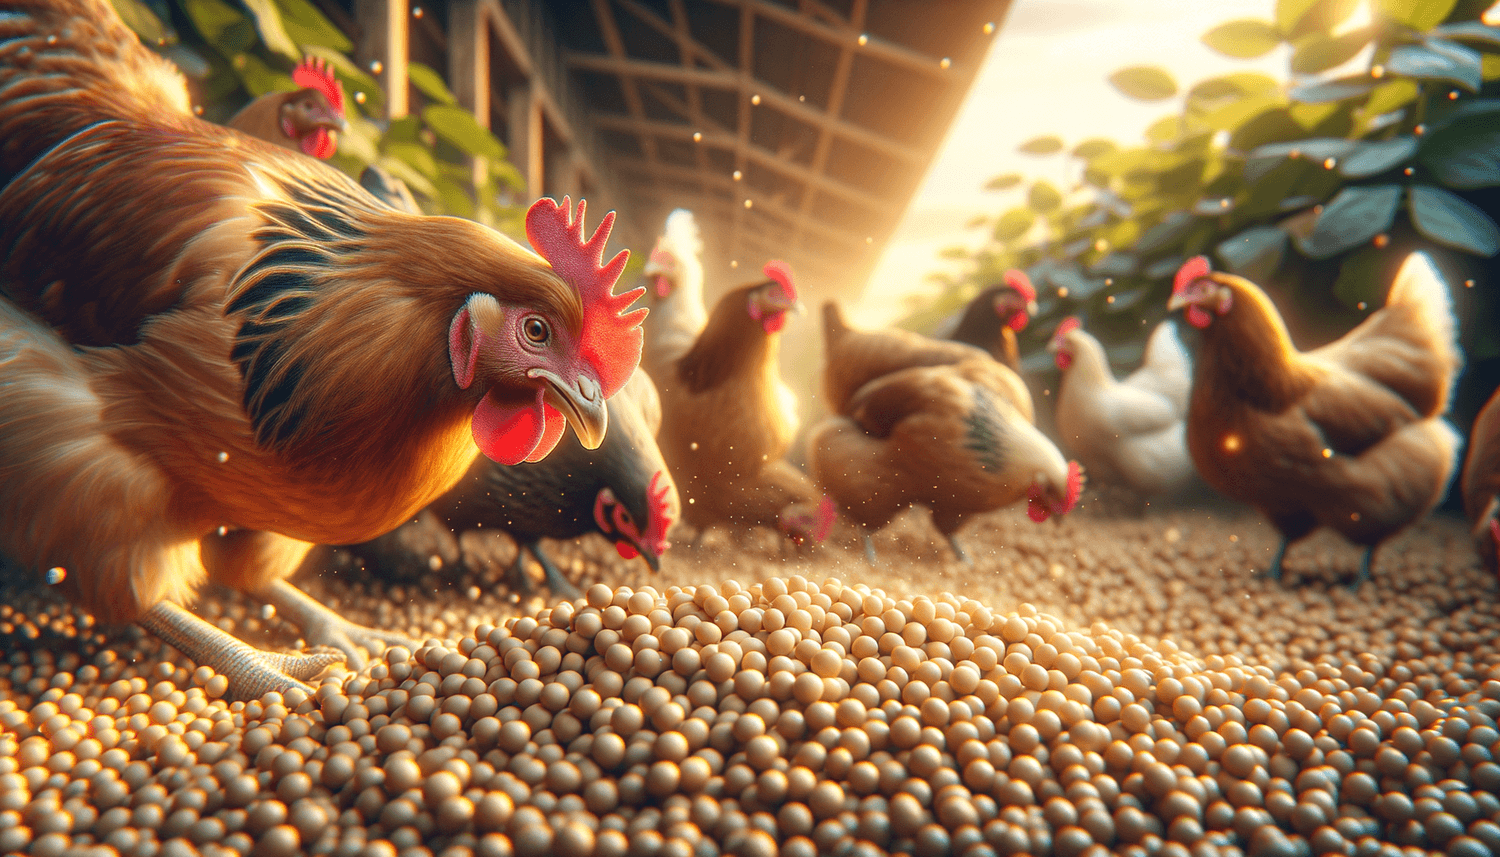 Can Chickens Eat Soy?